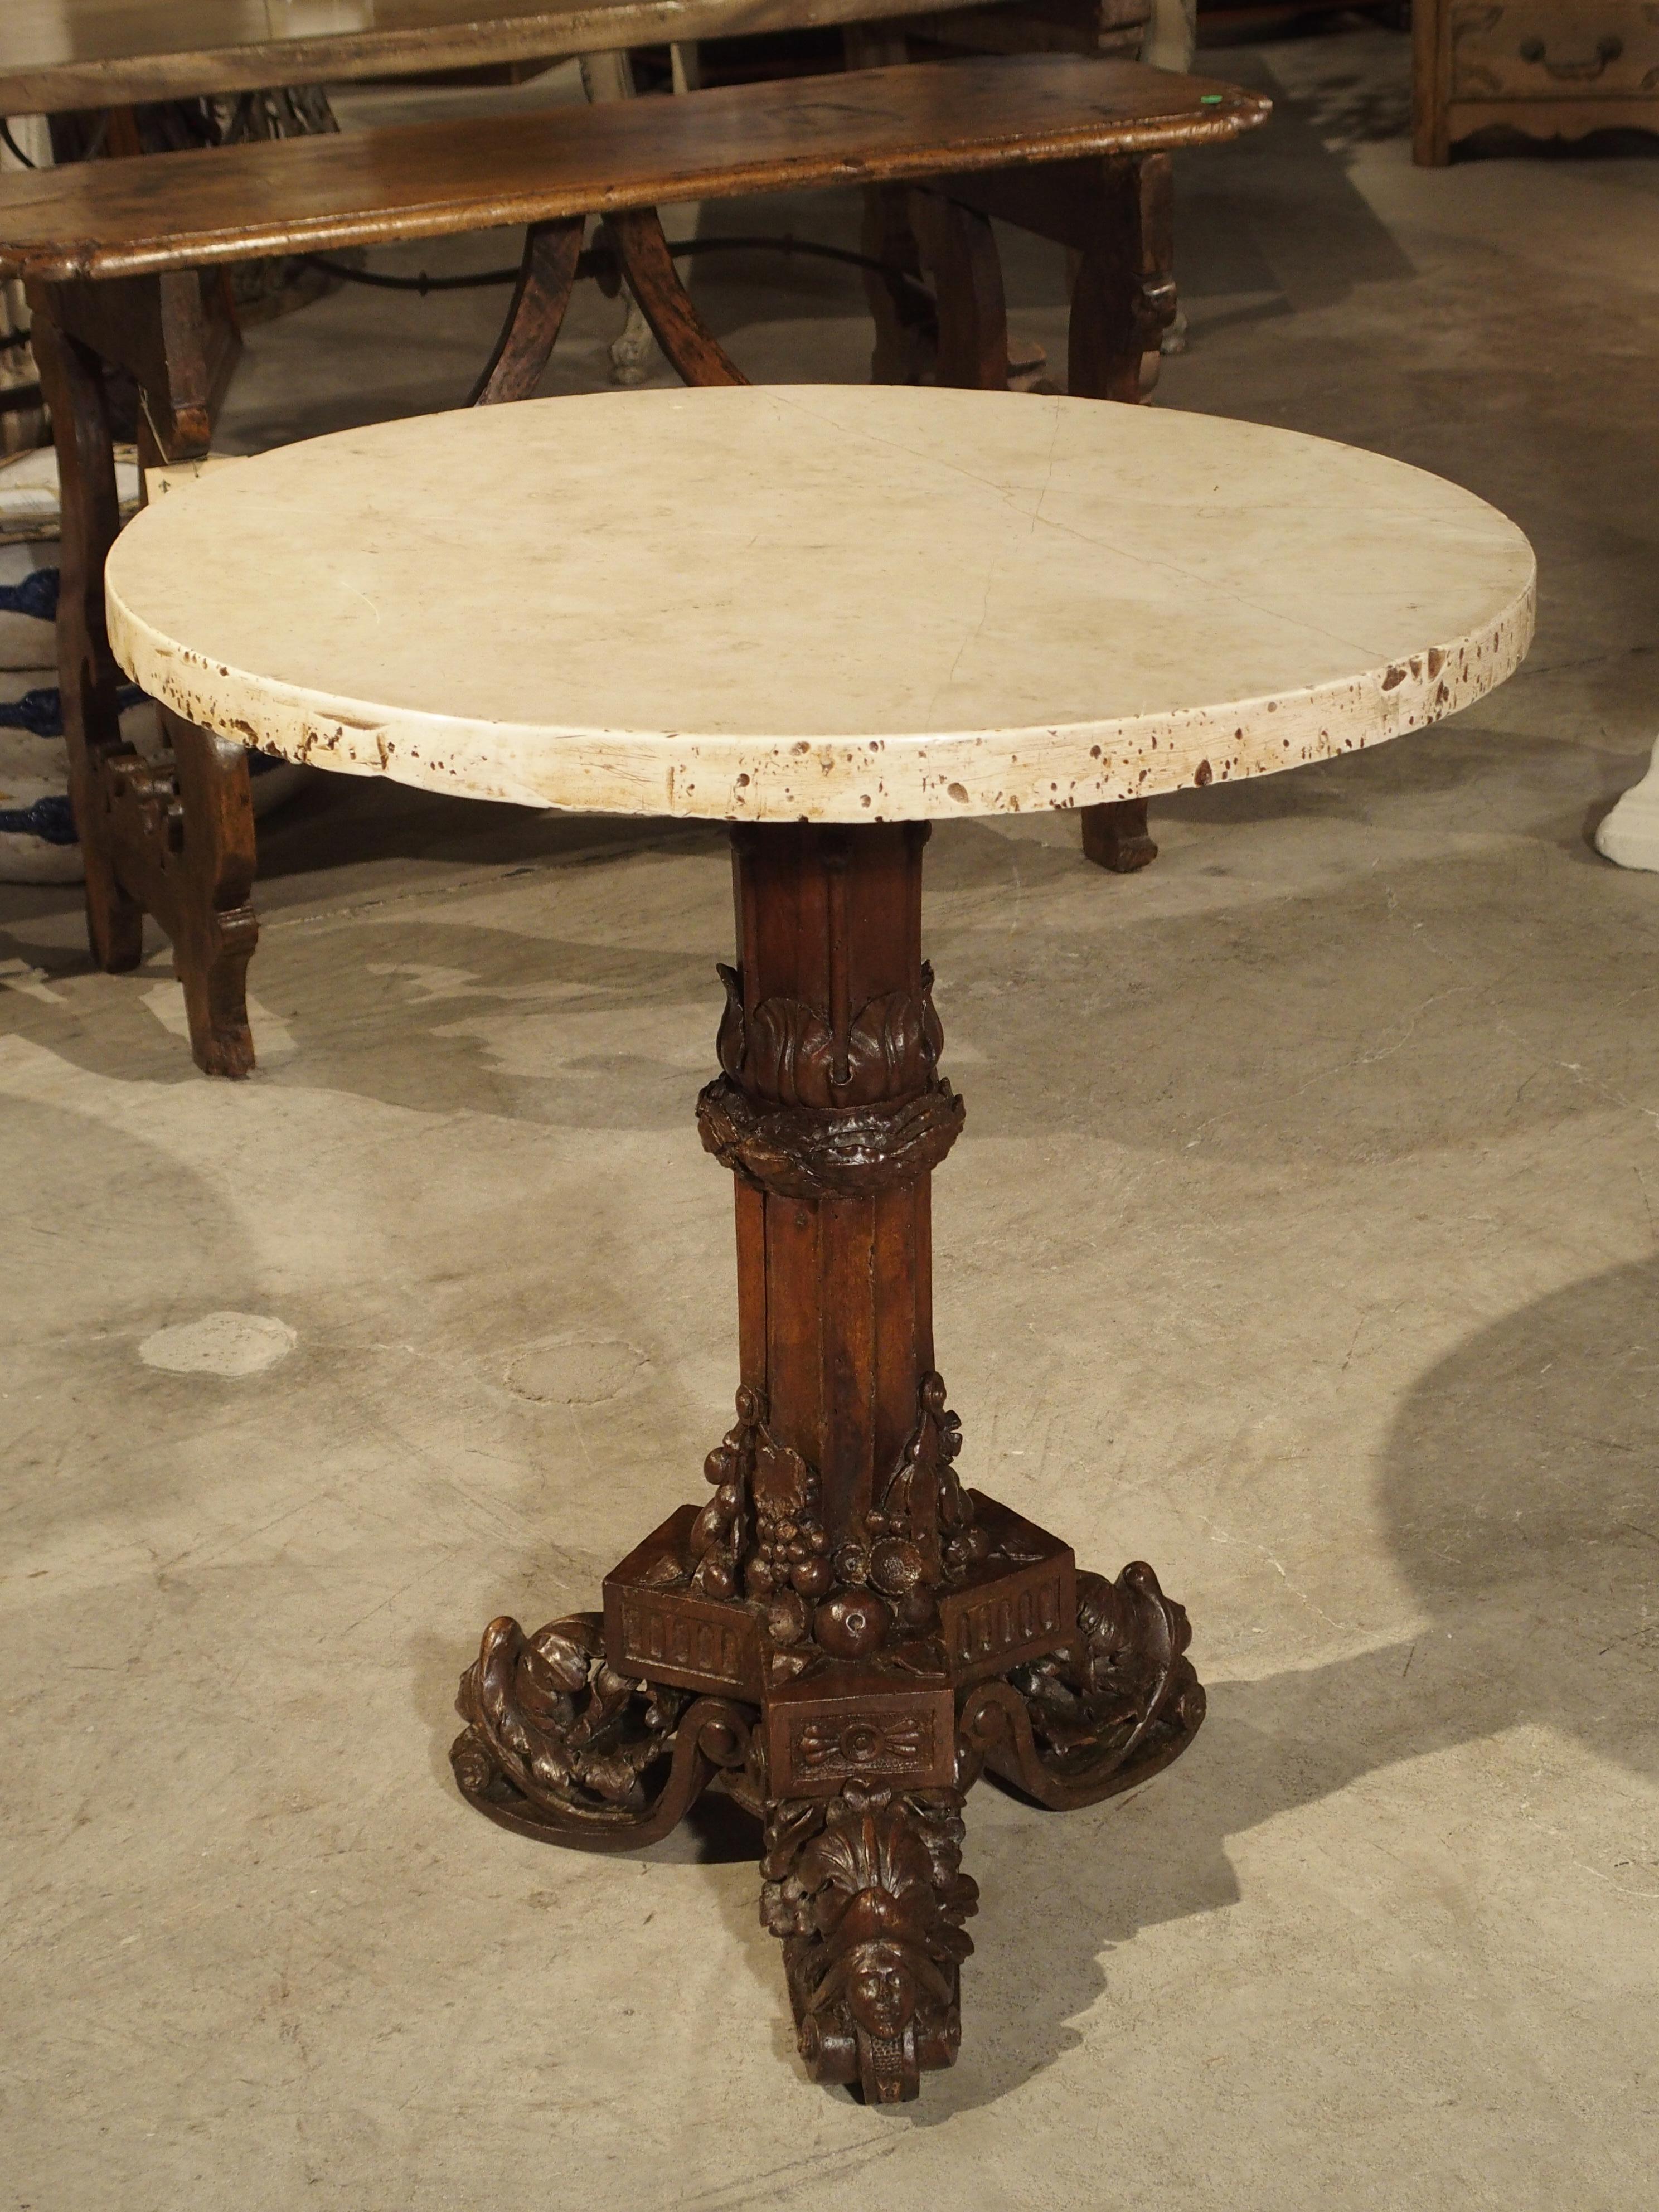 19th Century Antique Circular Genoese Carved Wood and Marble Table, circa 1820 For Sale